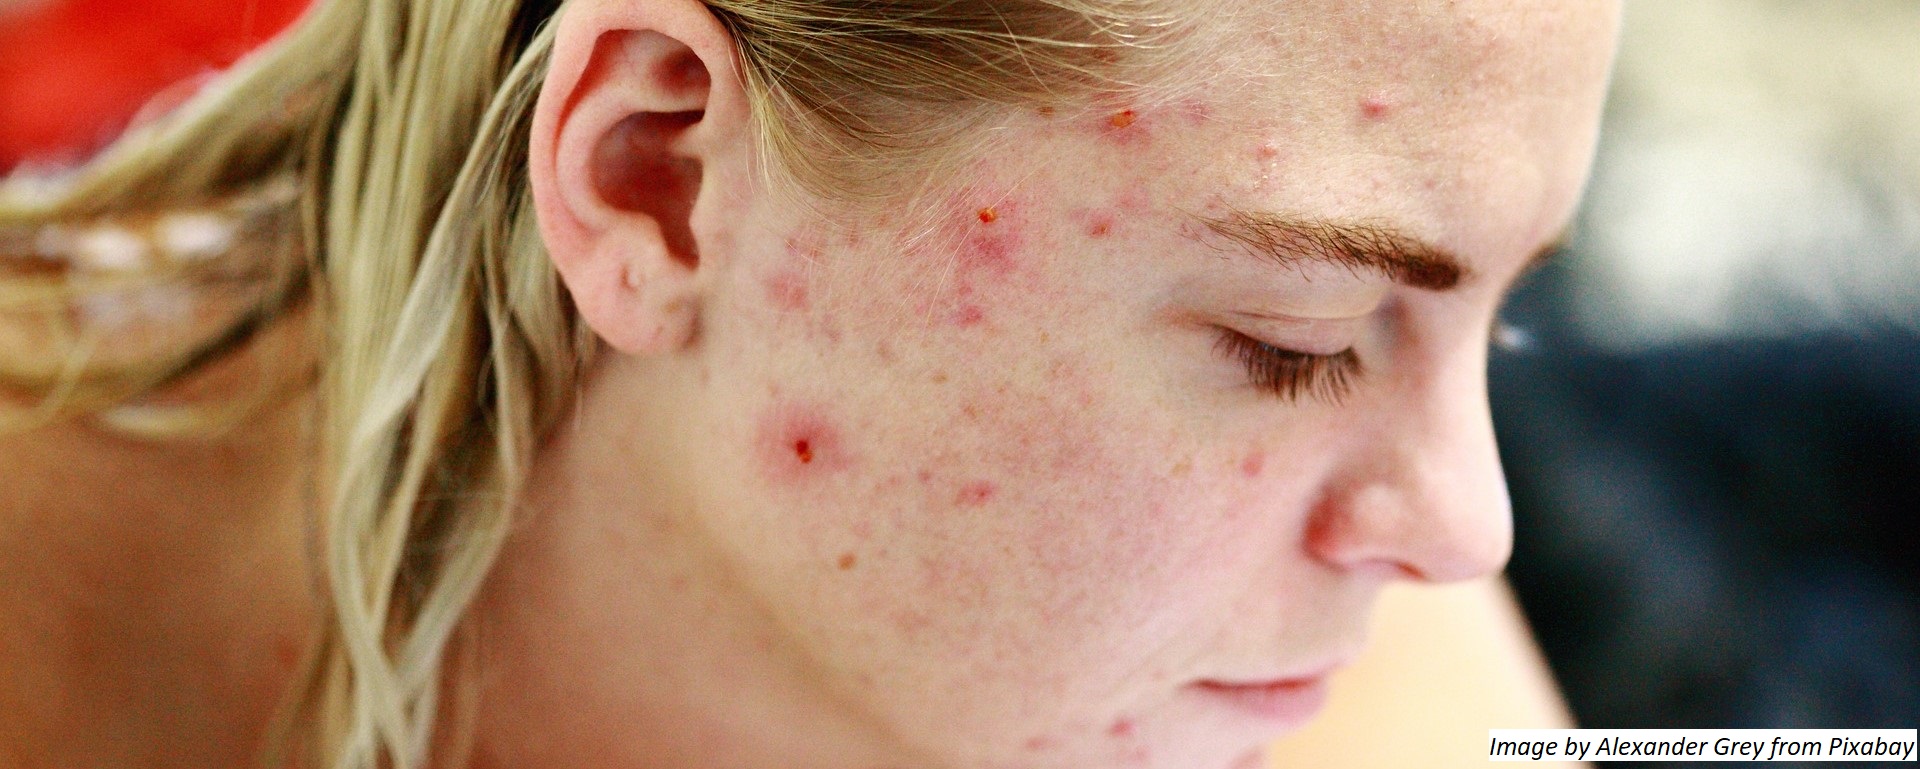 what is acne actually?